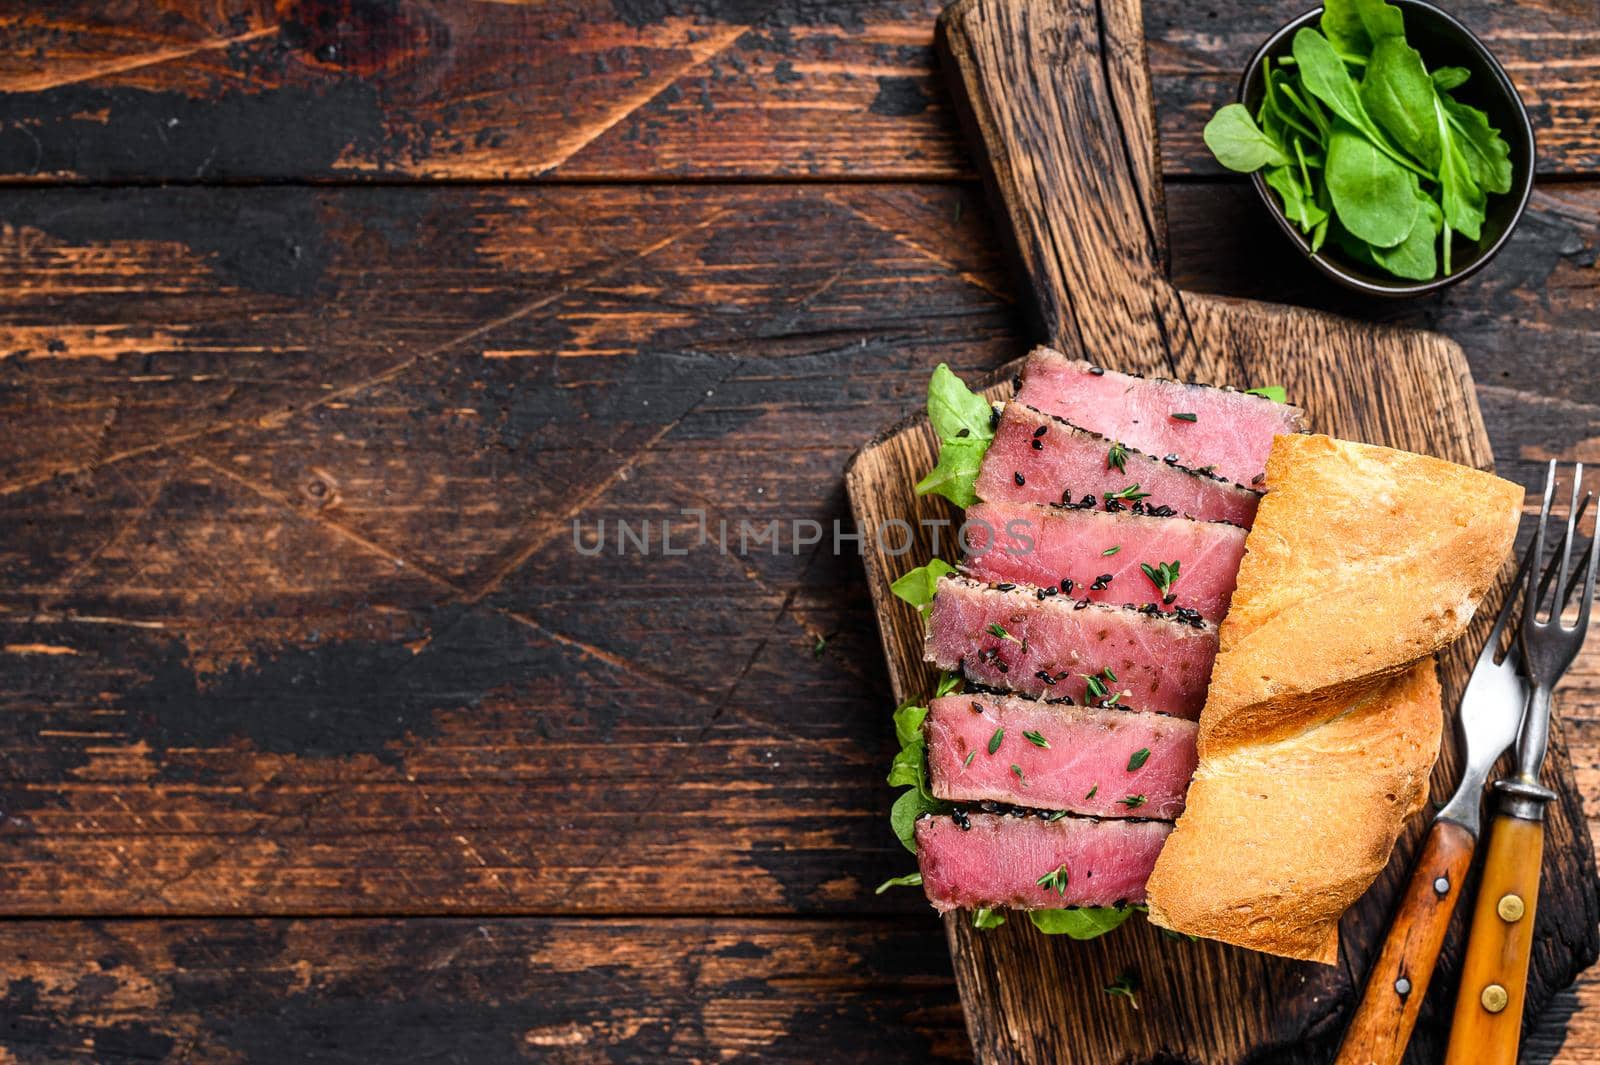 Grilled Ahi Tuna Steak and Avocado Sandwich with arugula on a cutting board. Dark wooden background. Top view. Copy space by Composter